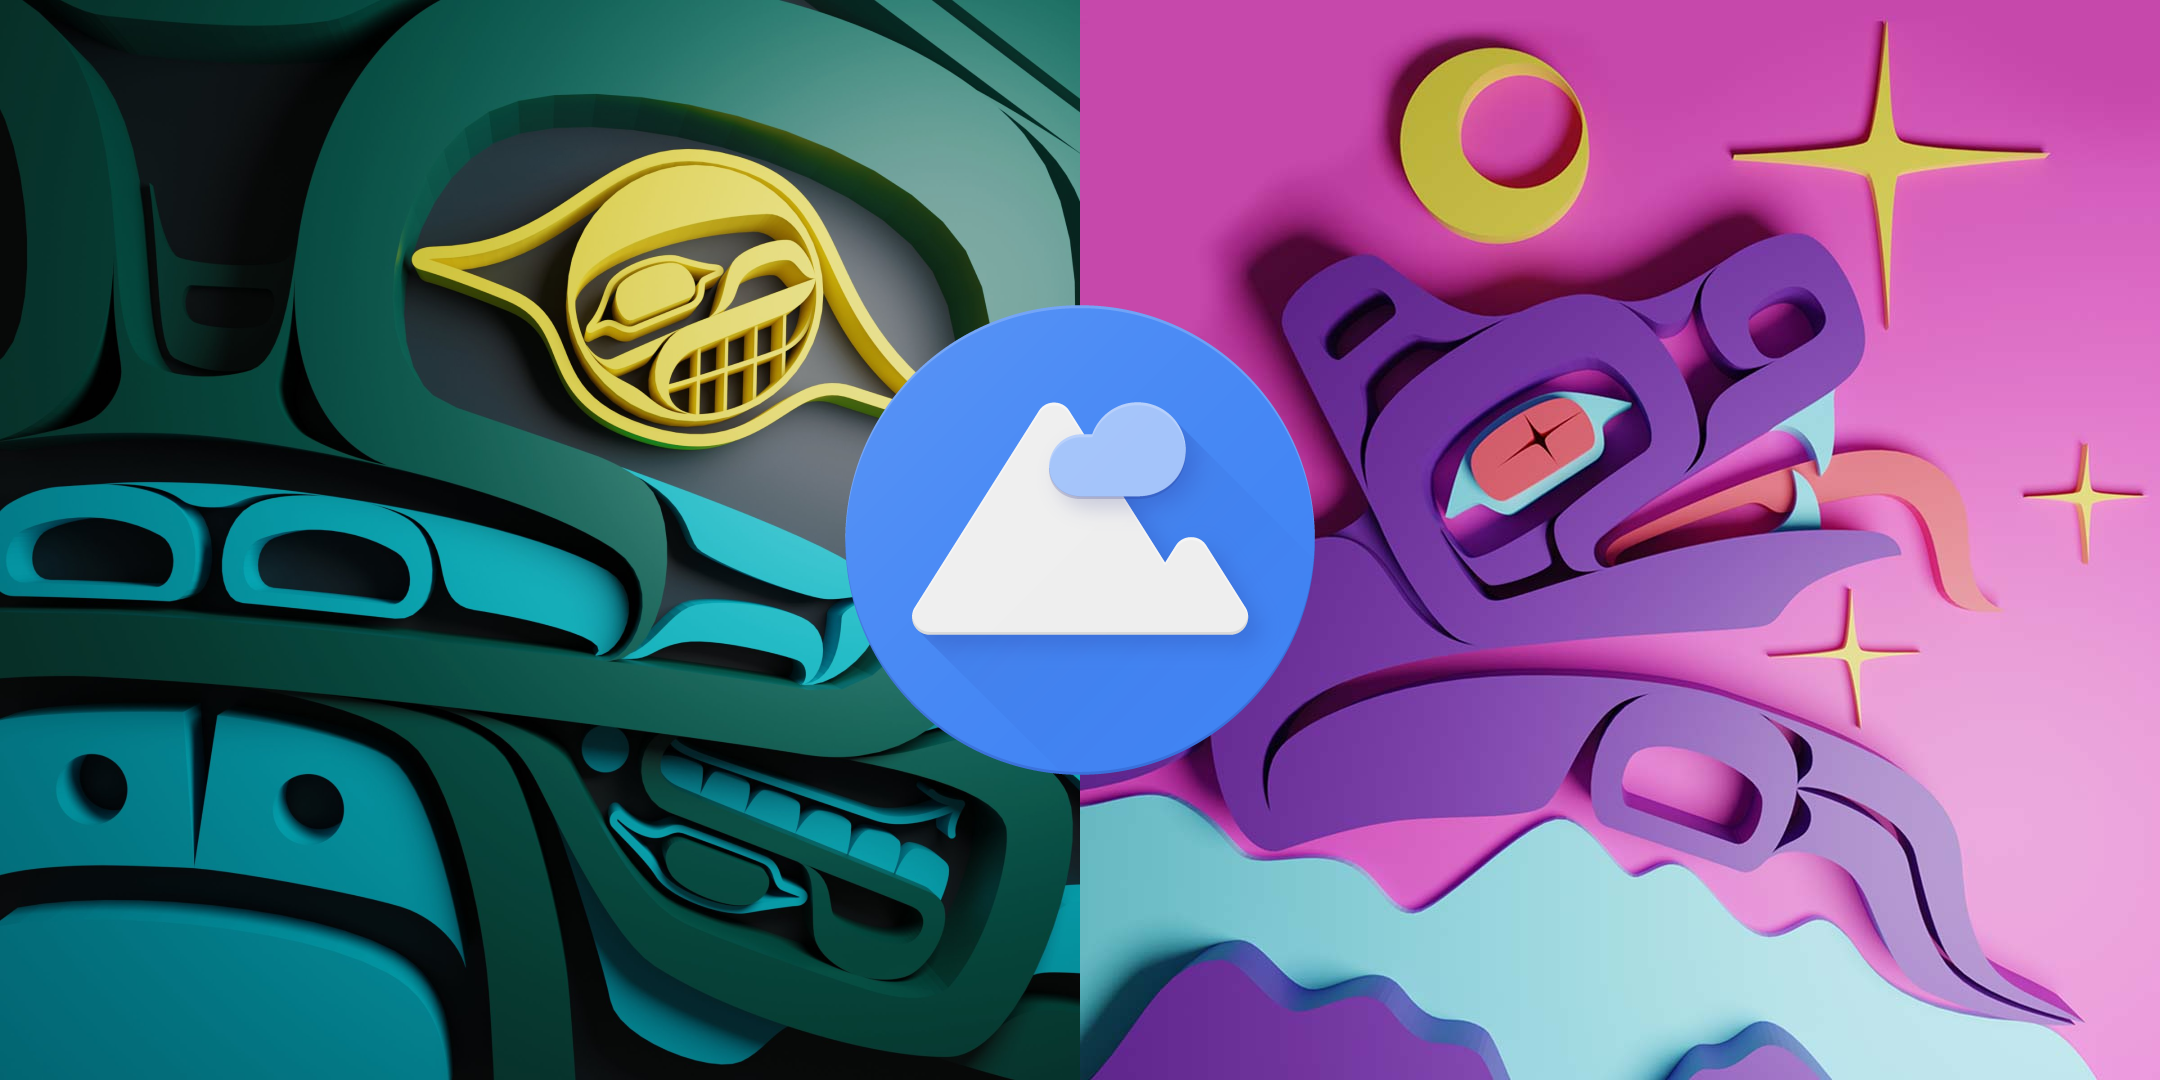 Google Icon Wallpapers - Wallpaper Cave-mncb.edu.vn